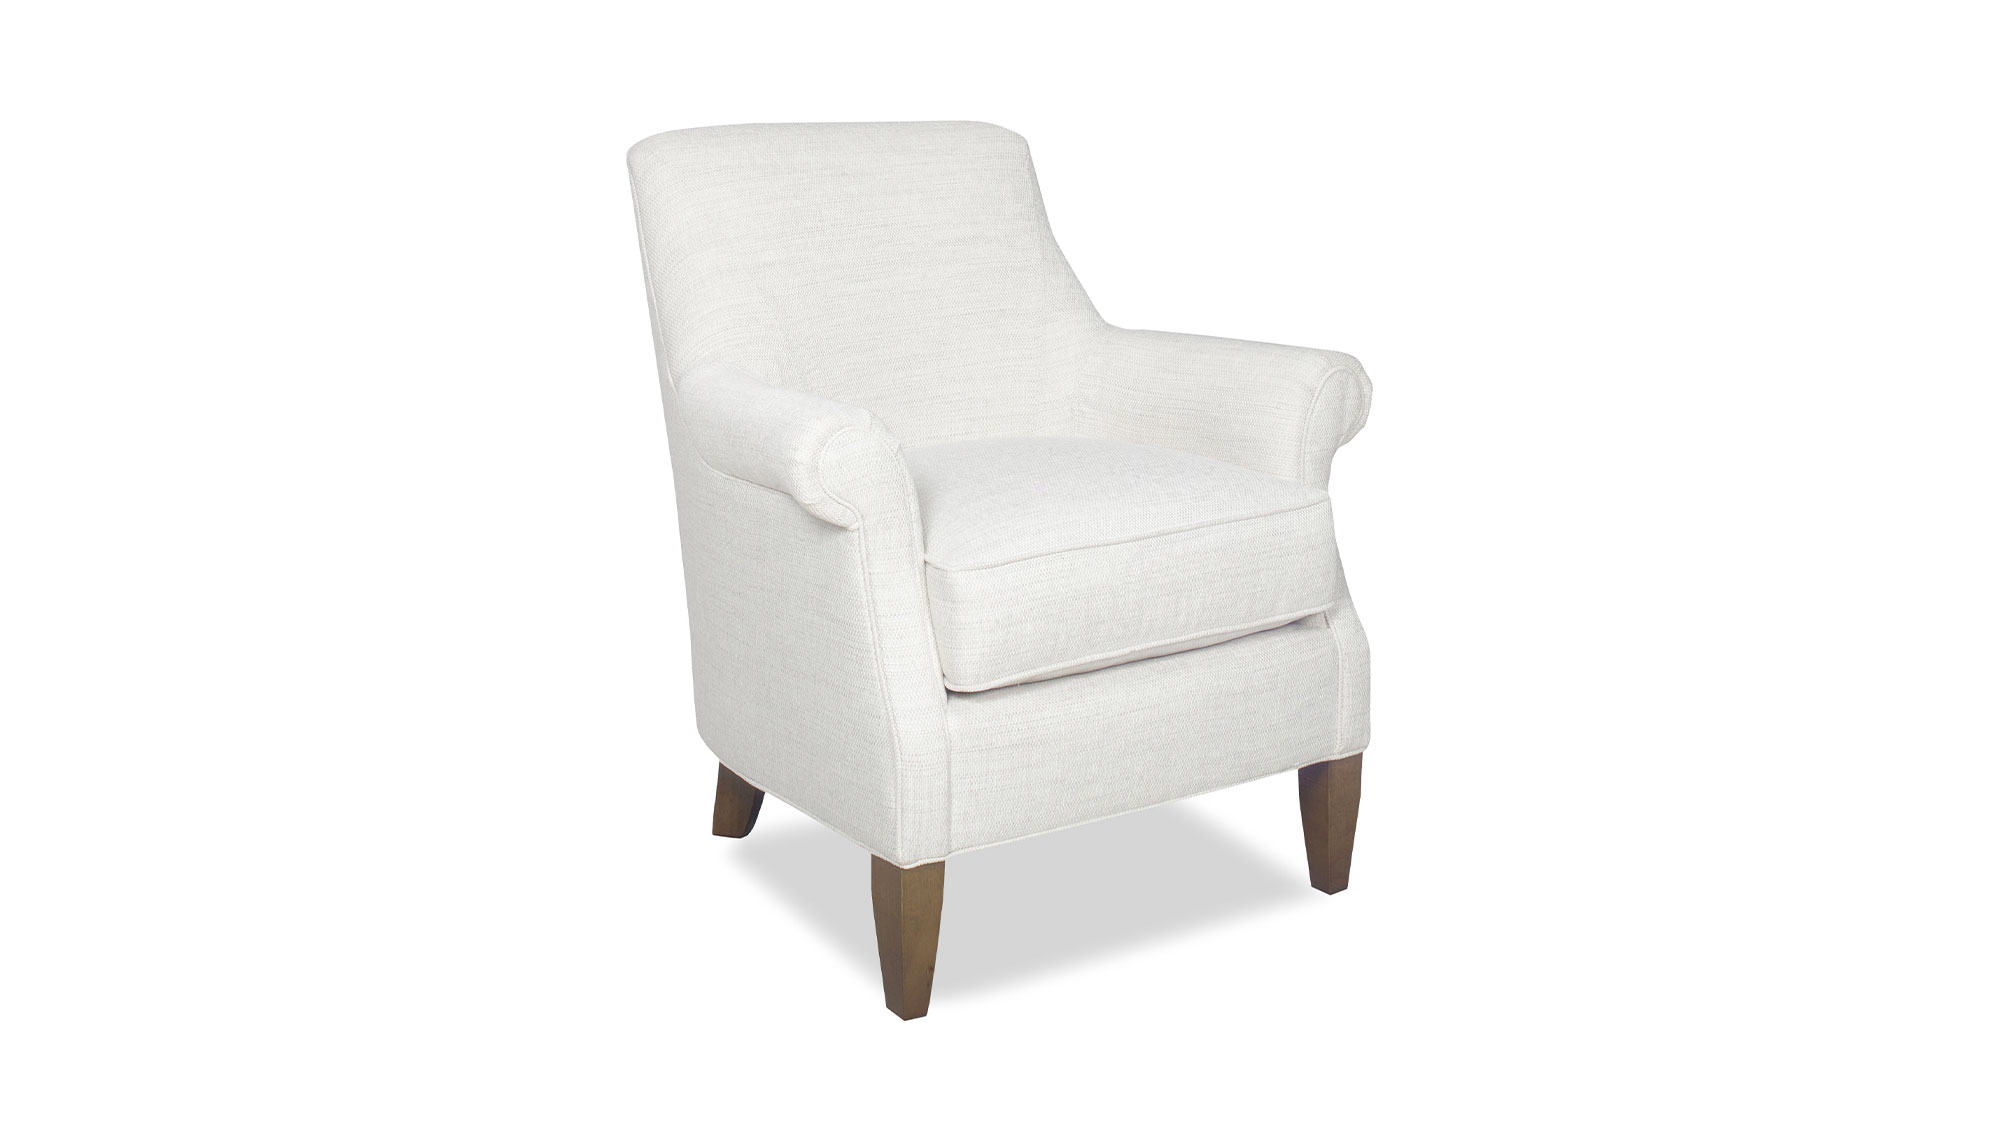 Temple Furniture chair